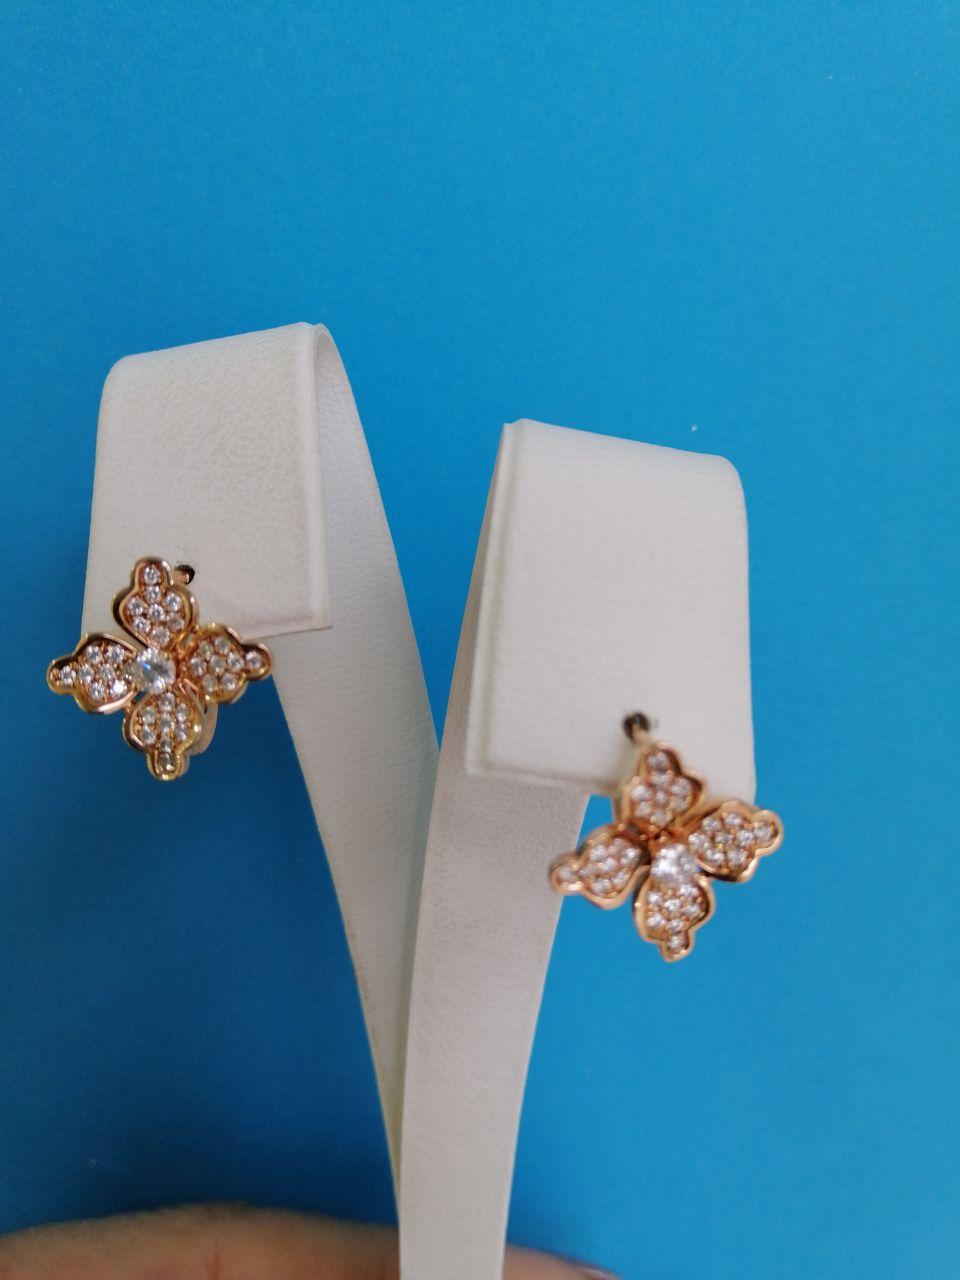 Earrings Yellow Gold 14 K (Matching Ring Available)
Diamond 2-Round 57-0,16-3/6A
Diamond 64-Round 57-0,29-4/6A
Weight 3.17 grams

With a heritage of ancient fine Swiss jewelry traditions, NATKINA is a Geneva based jewellery brand, which creates